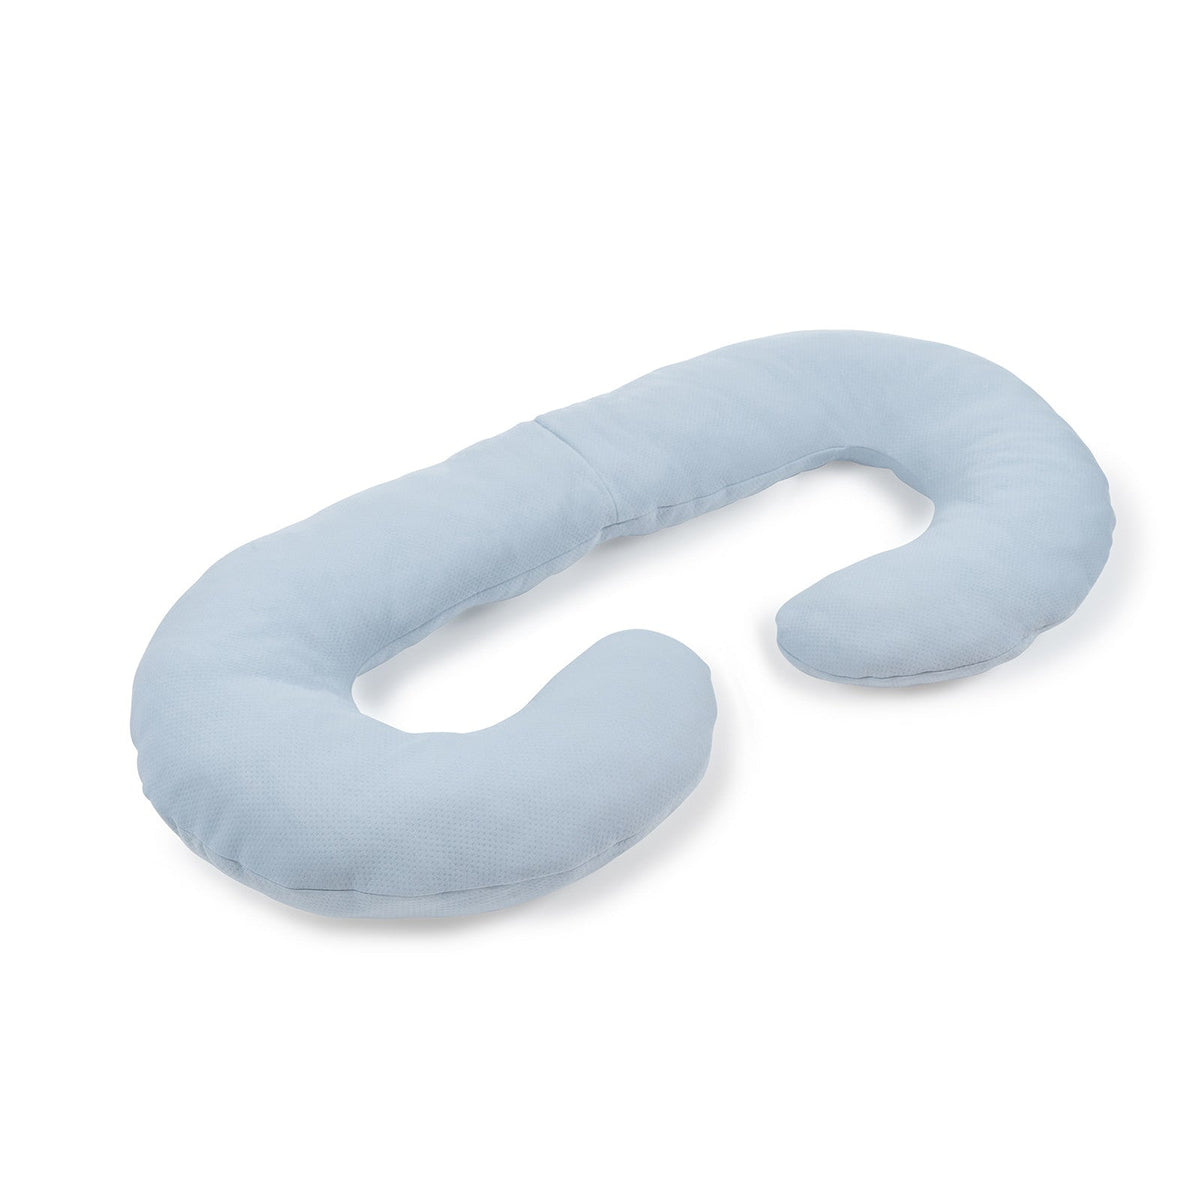 ComfySure Full Body Pregnancy Pillow - 58 J Shaped Maternity Pillow for  Pregnant Women - Hypoallergenic, Comfortable, Plush and Therapeutic 